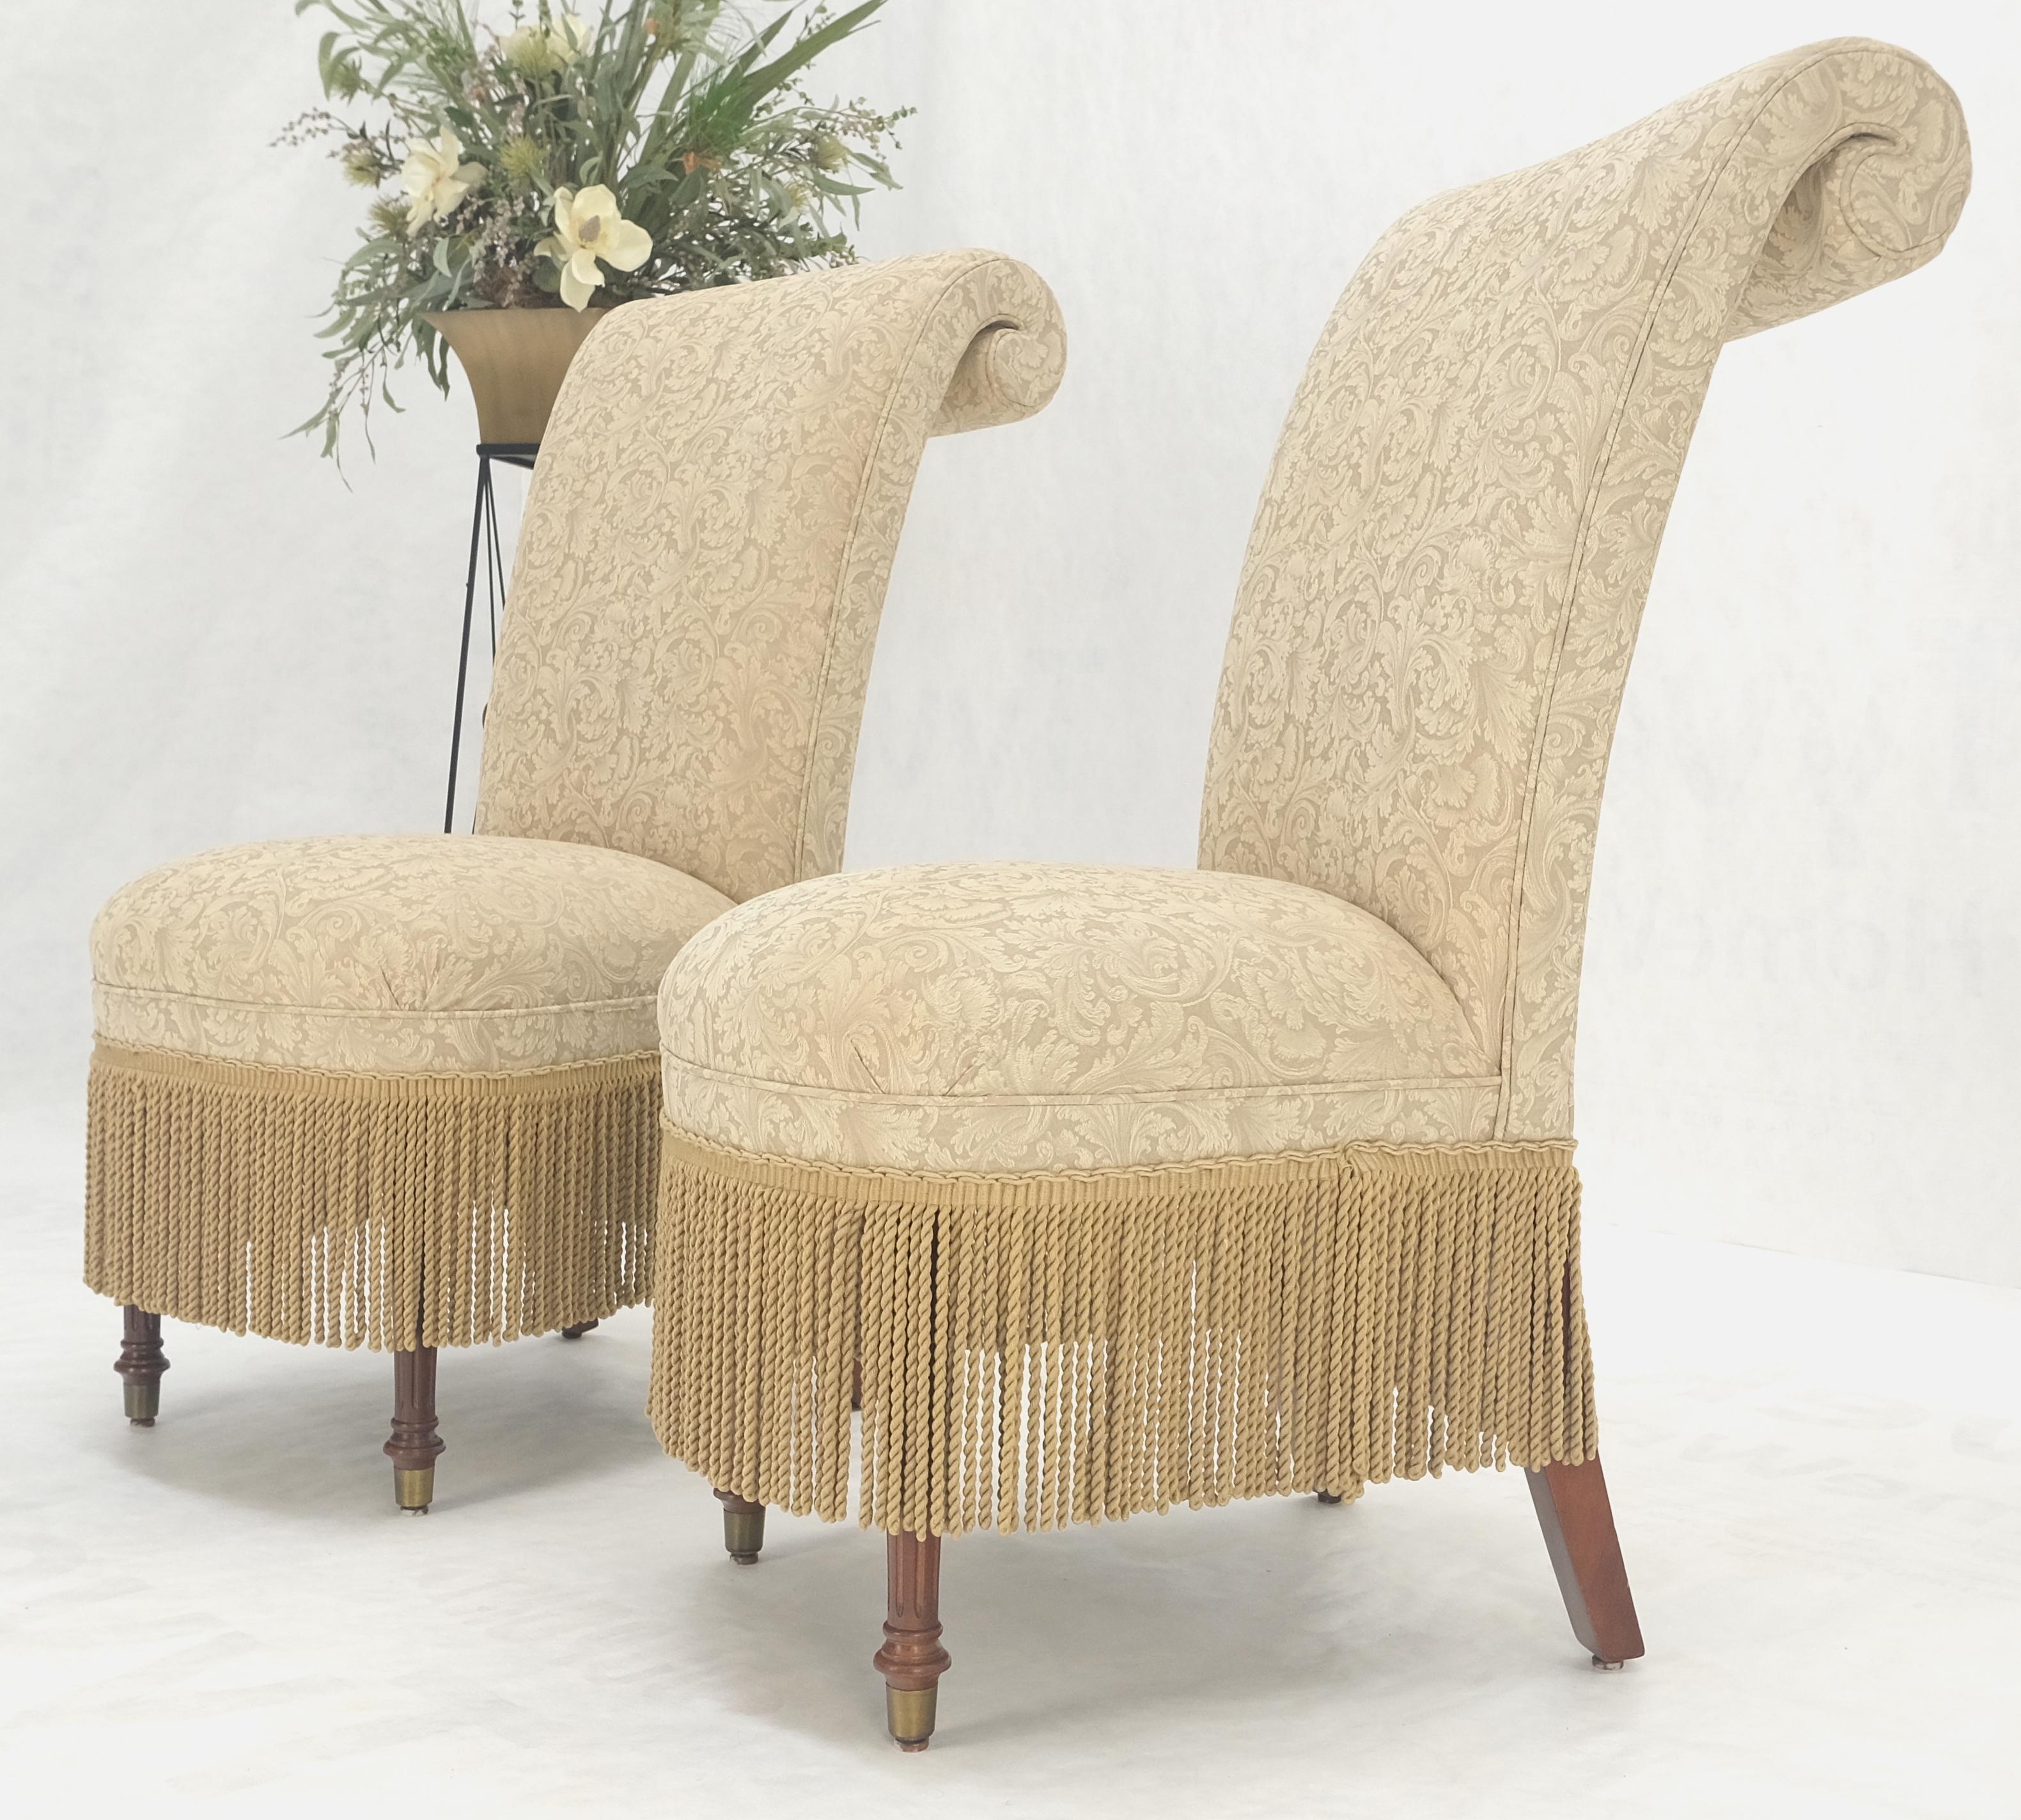 Upholstery Pair Decorative Turned Mahogany Legs Tassels Decorated Fireside Slip Chair MINT! For Sale